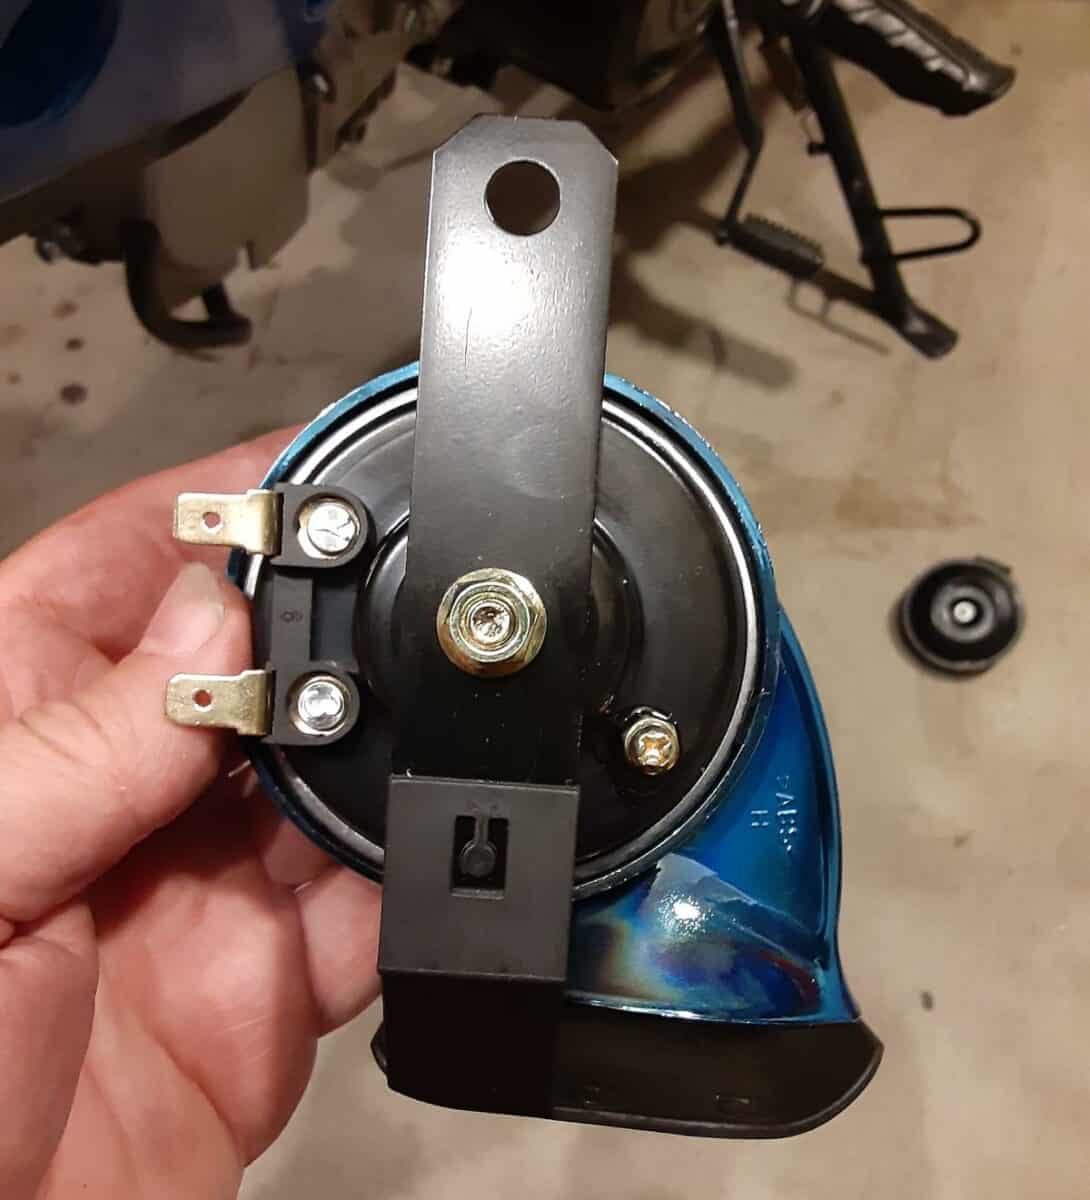 Assembled motorcycle horn upgrade.